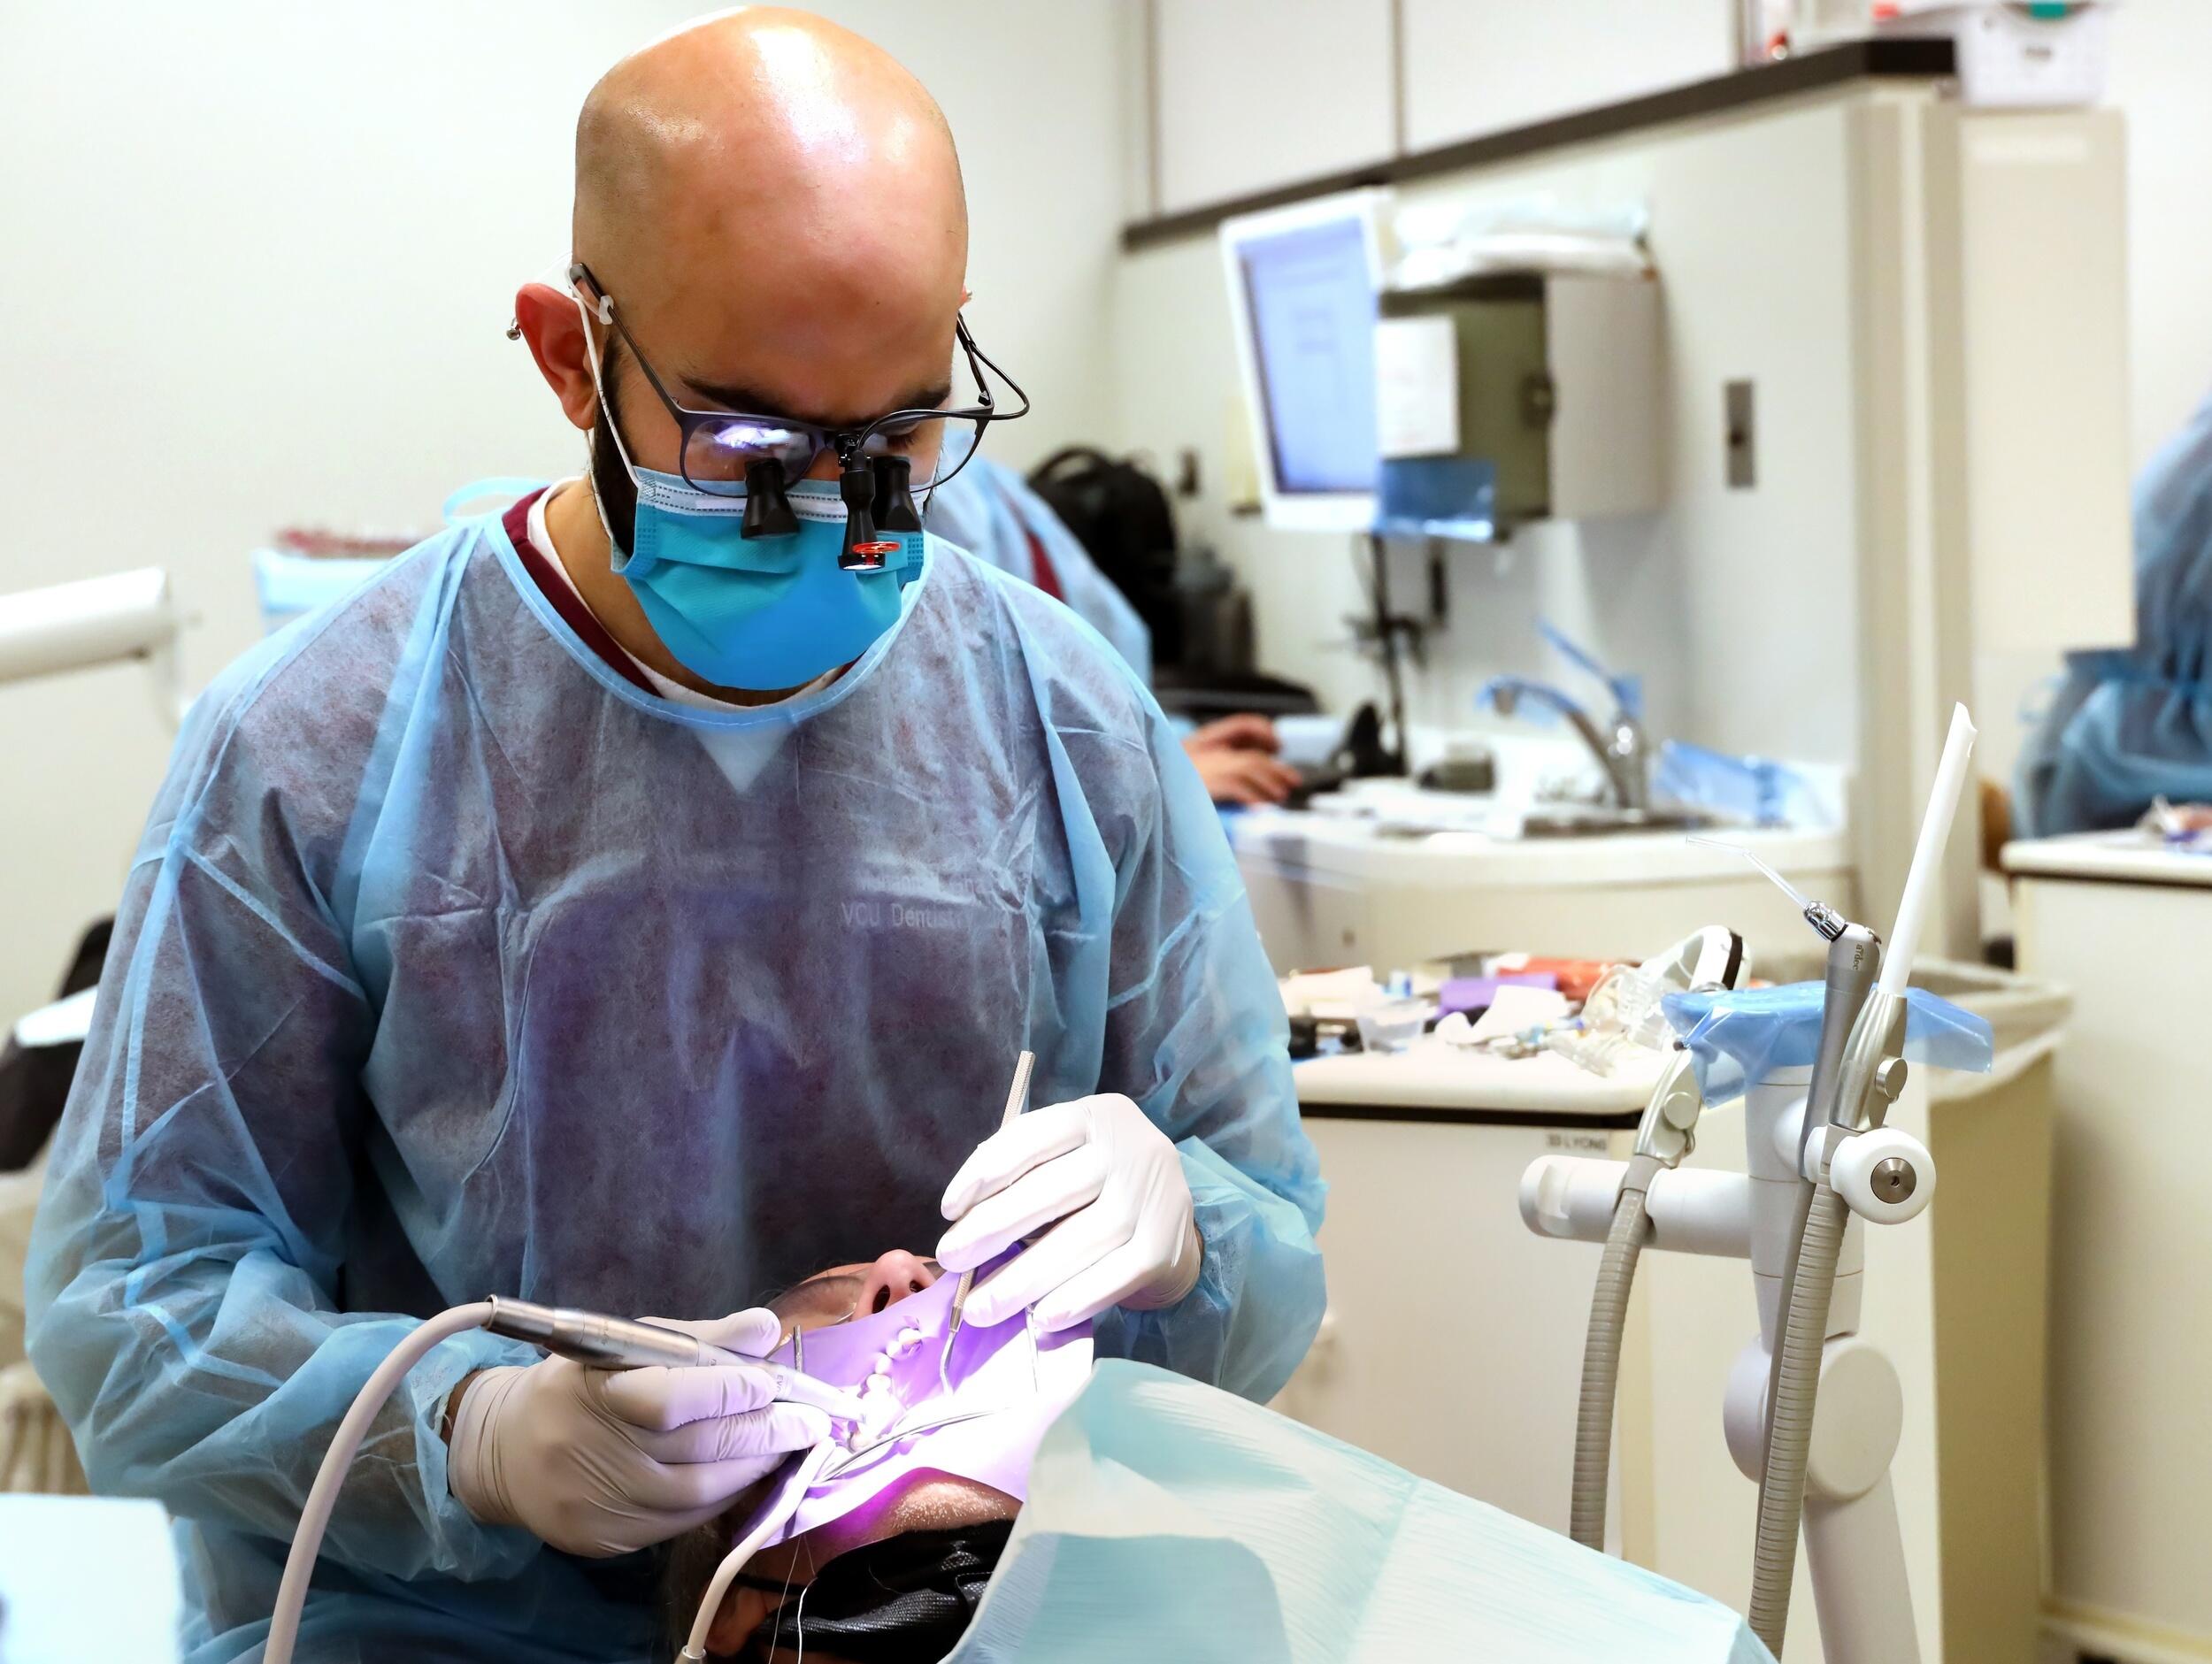 A photo of a man wearing blue scrubs and a face mask cleaning the teeth of another person sitting in a dental chair in front of him. 